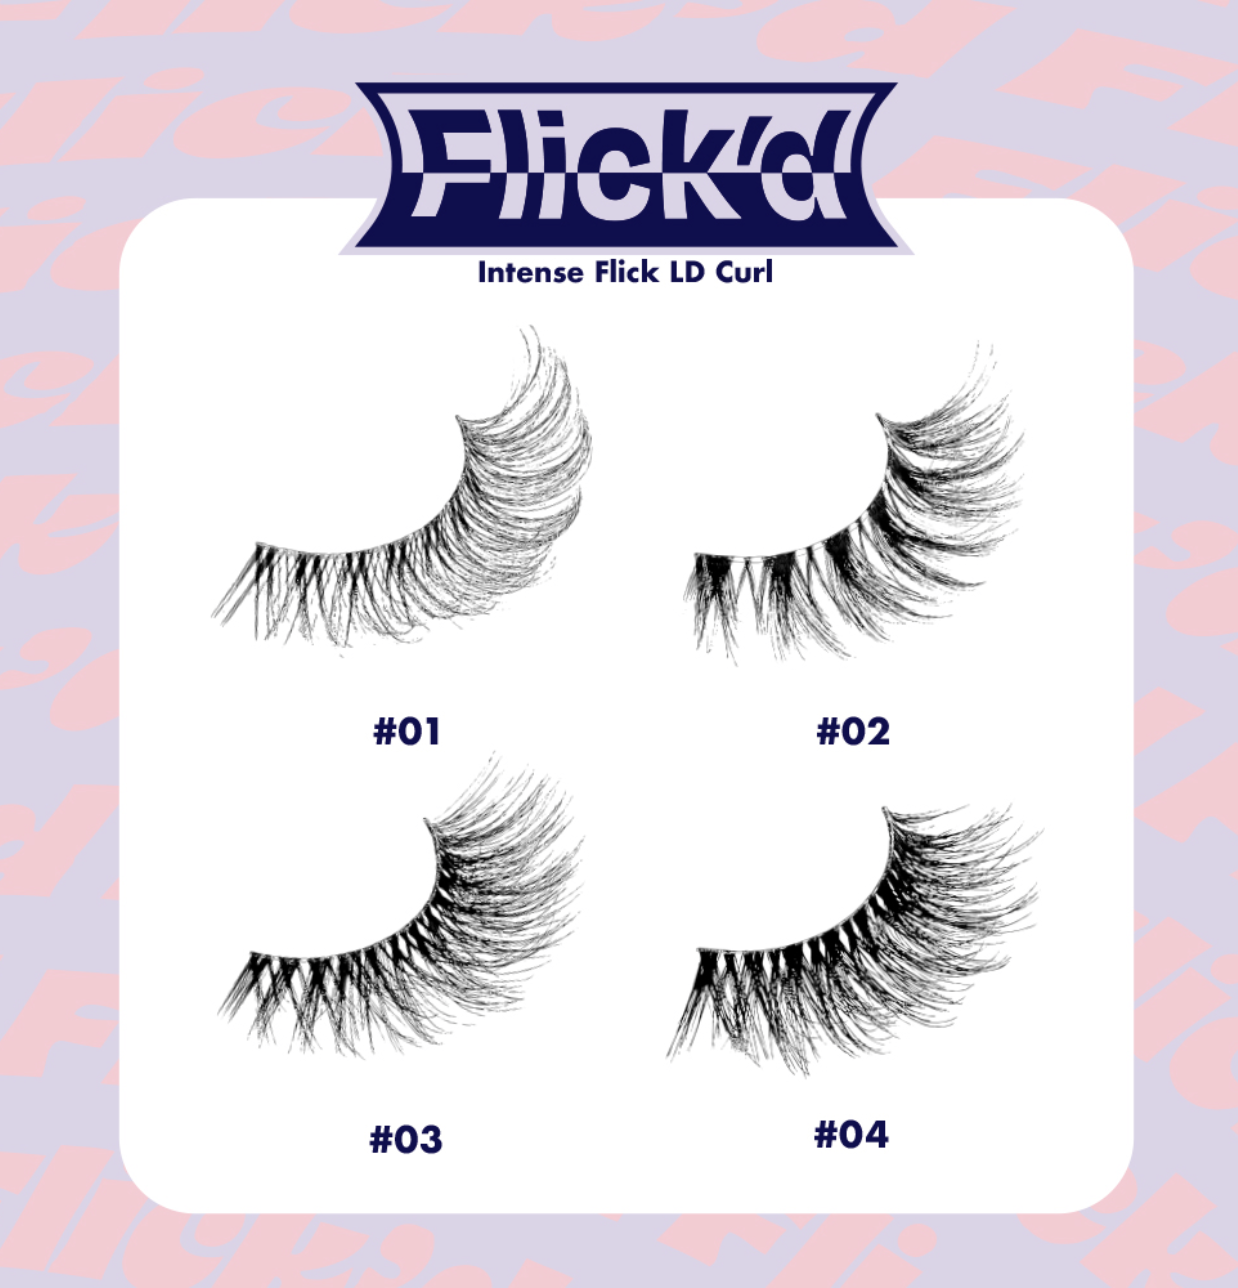 iEnvy 3D Flick'd Lashes (4 options) - BPolished Beauty Supply